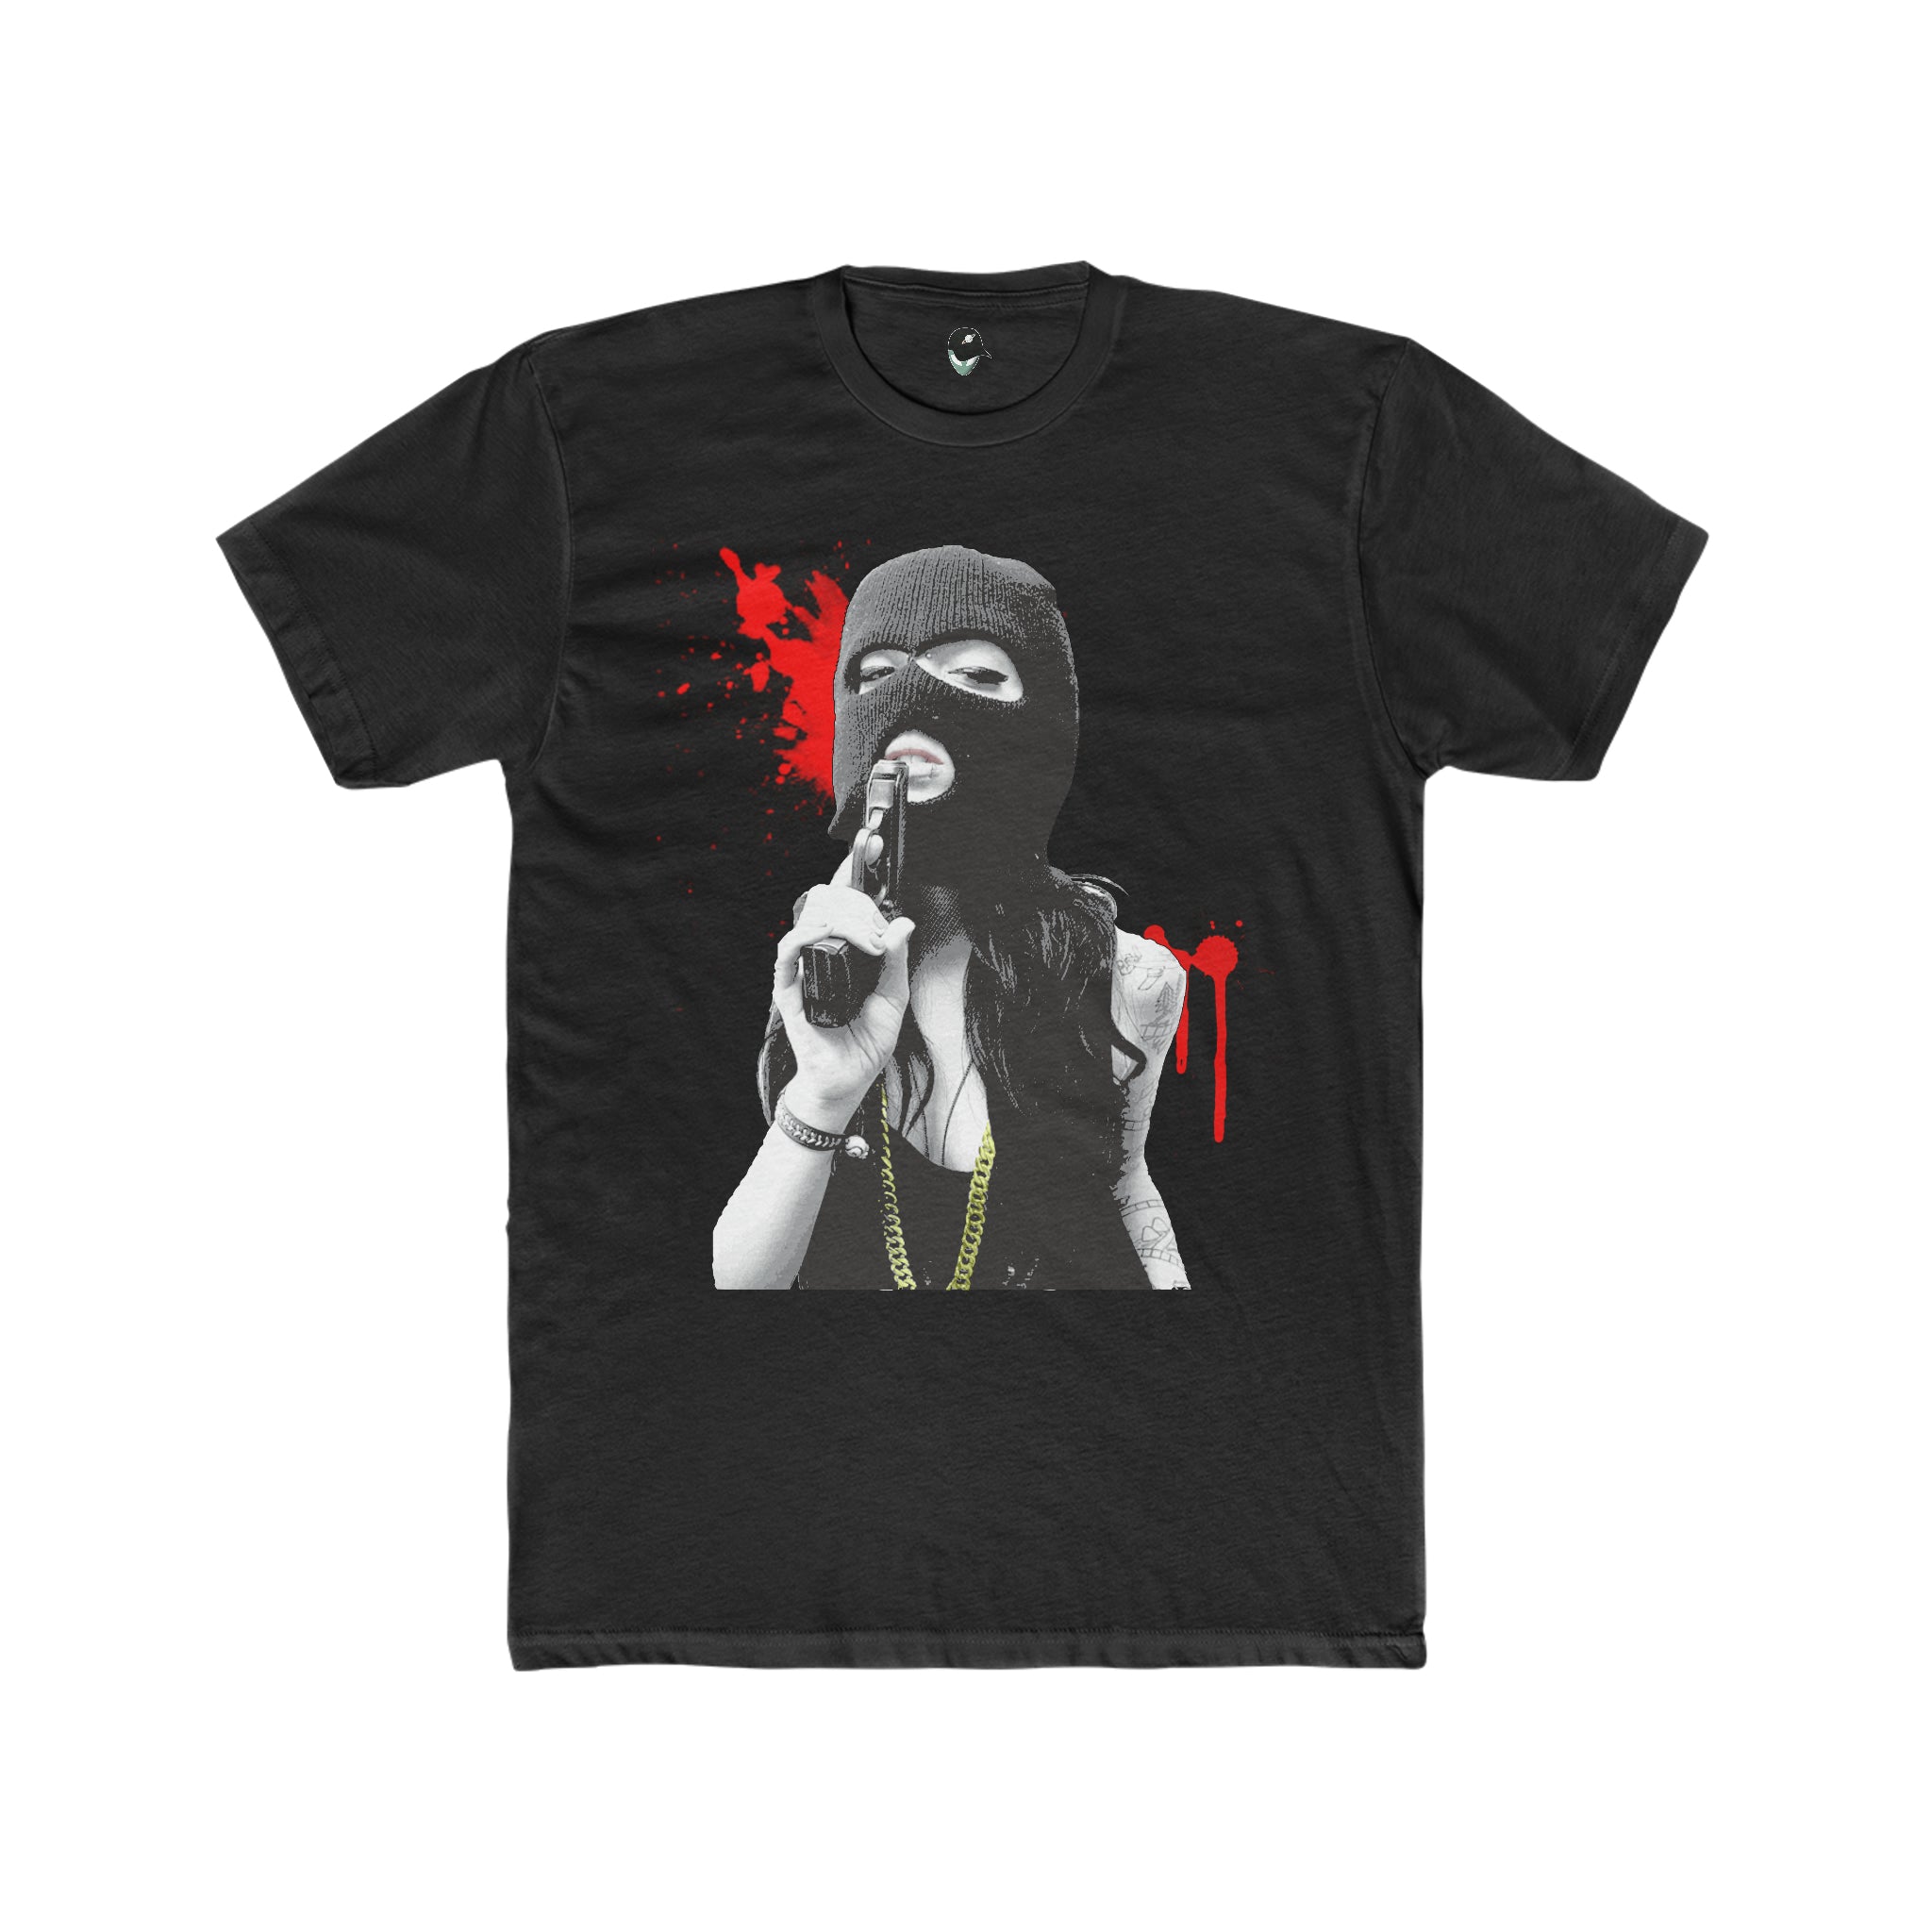 Bad Intentions T-Shirt